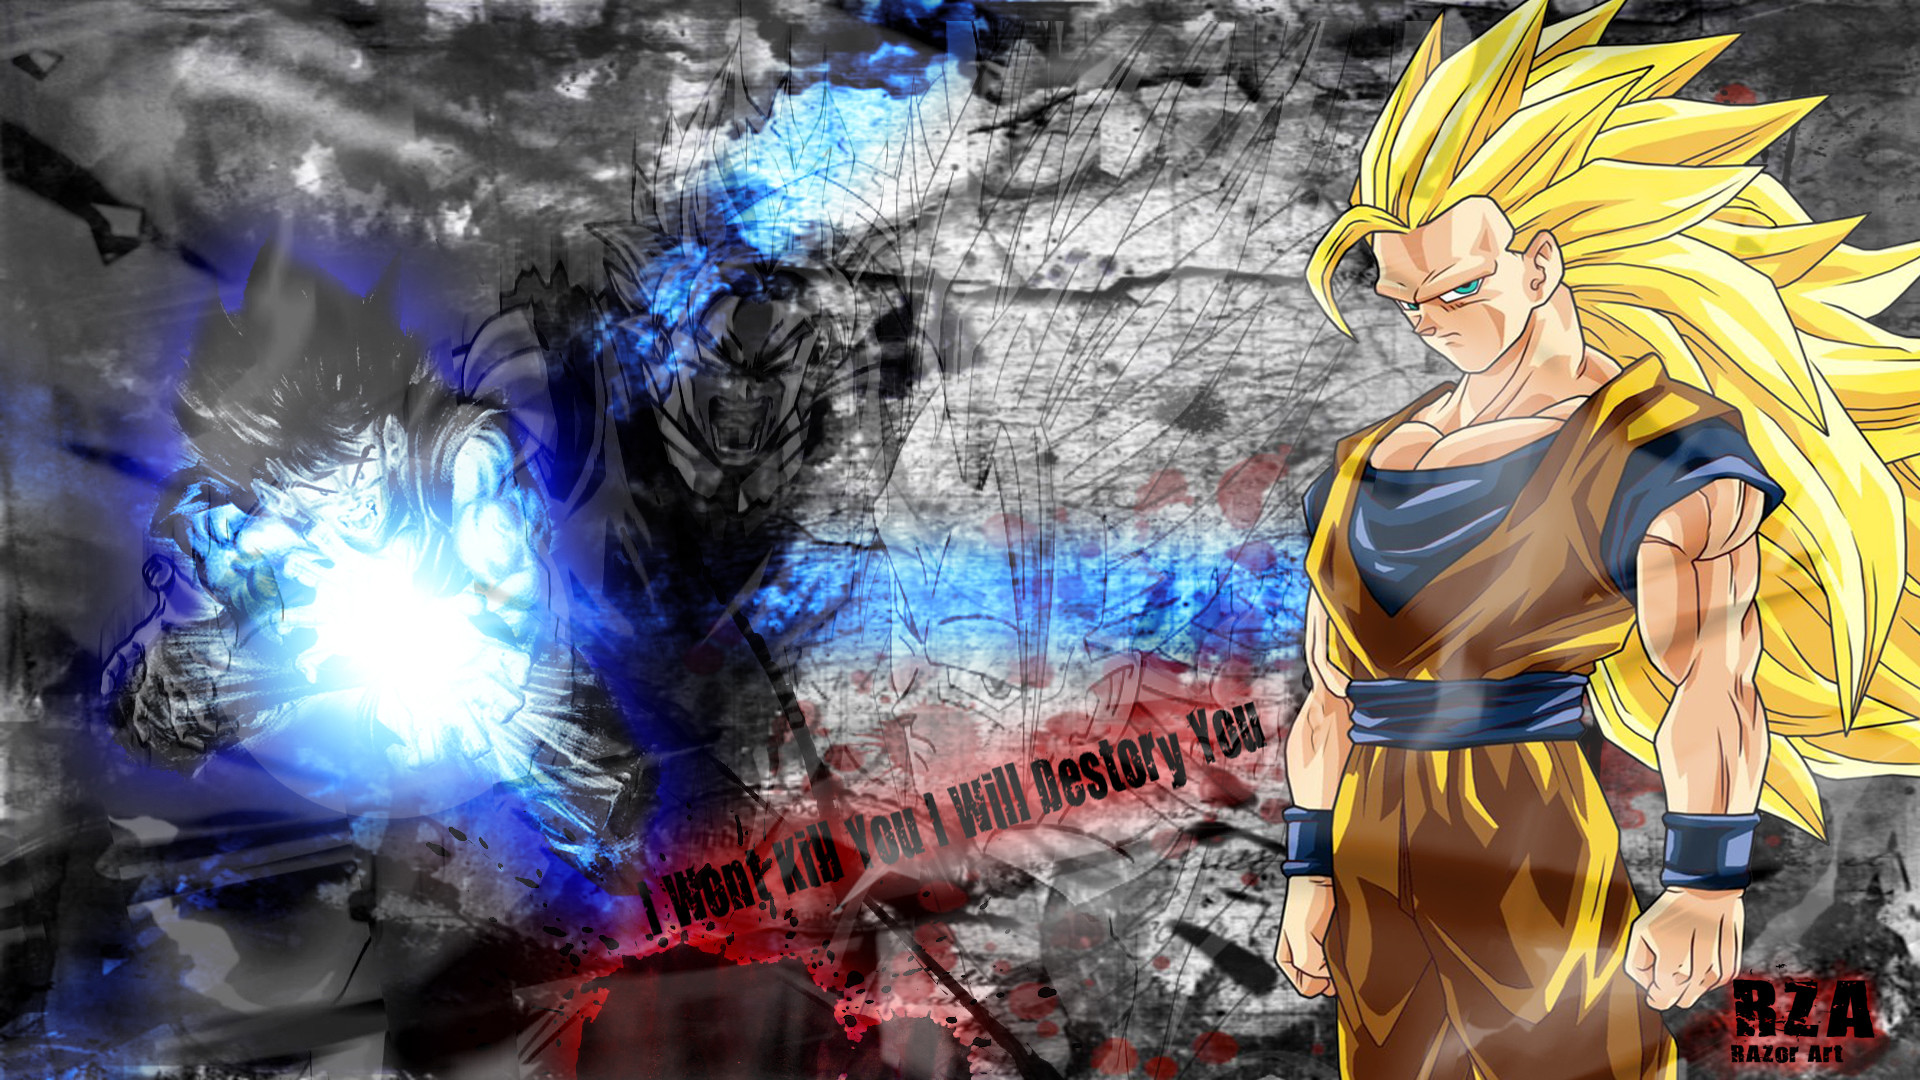 1920x1080 Dbz Backgrounds Images Download.